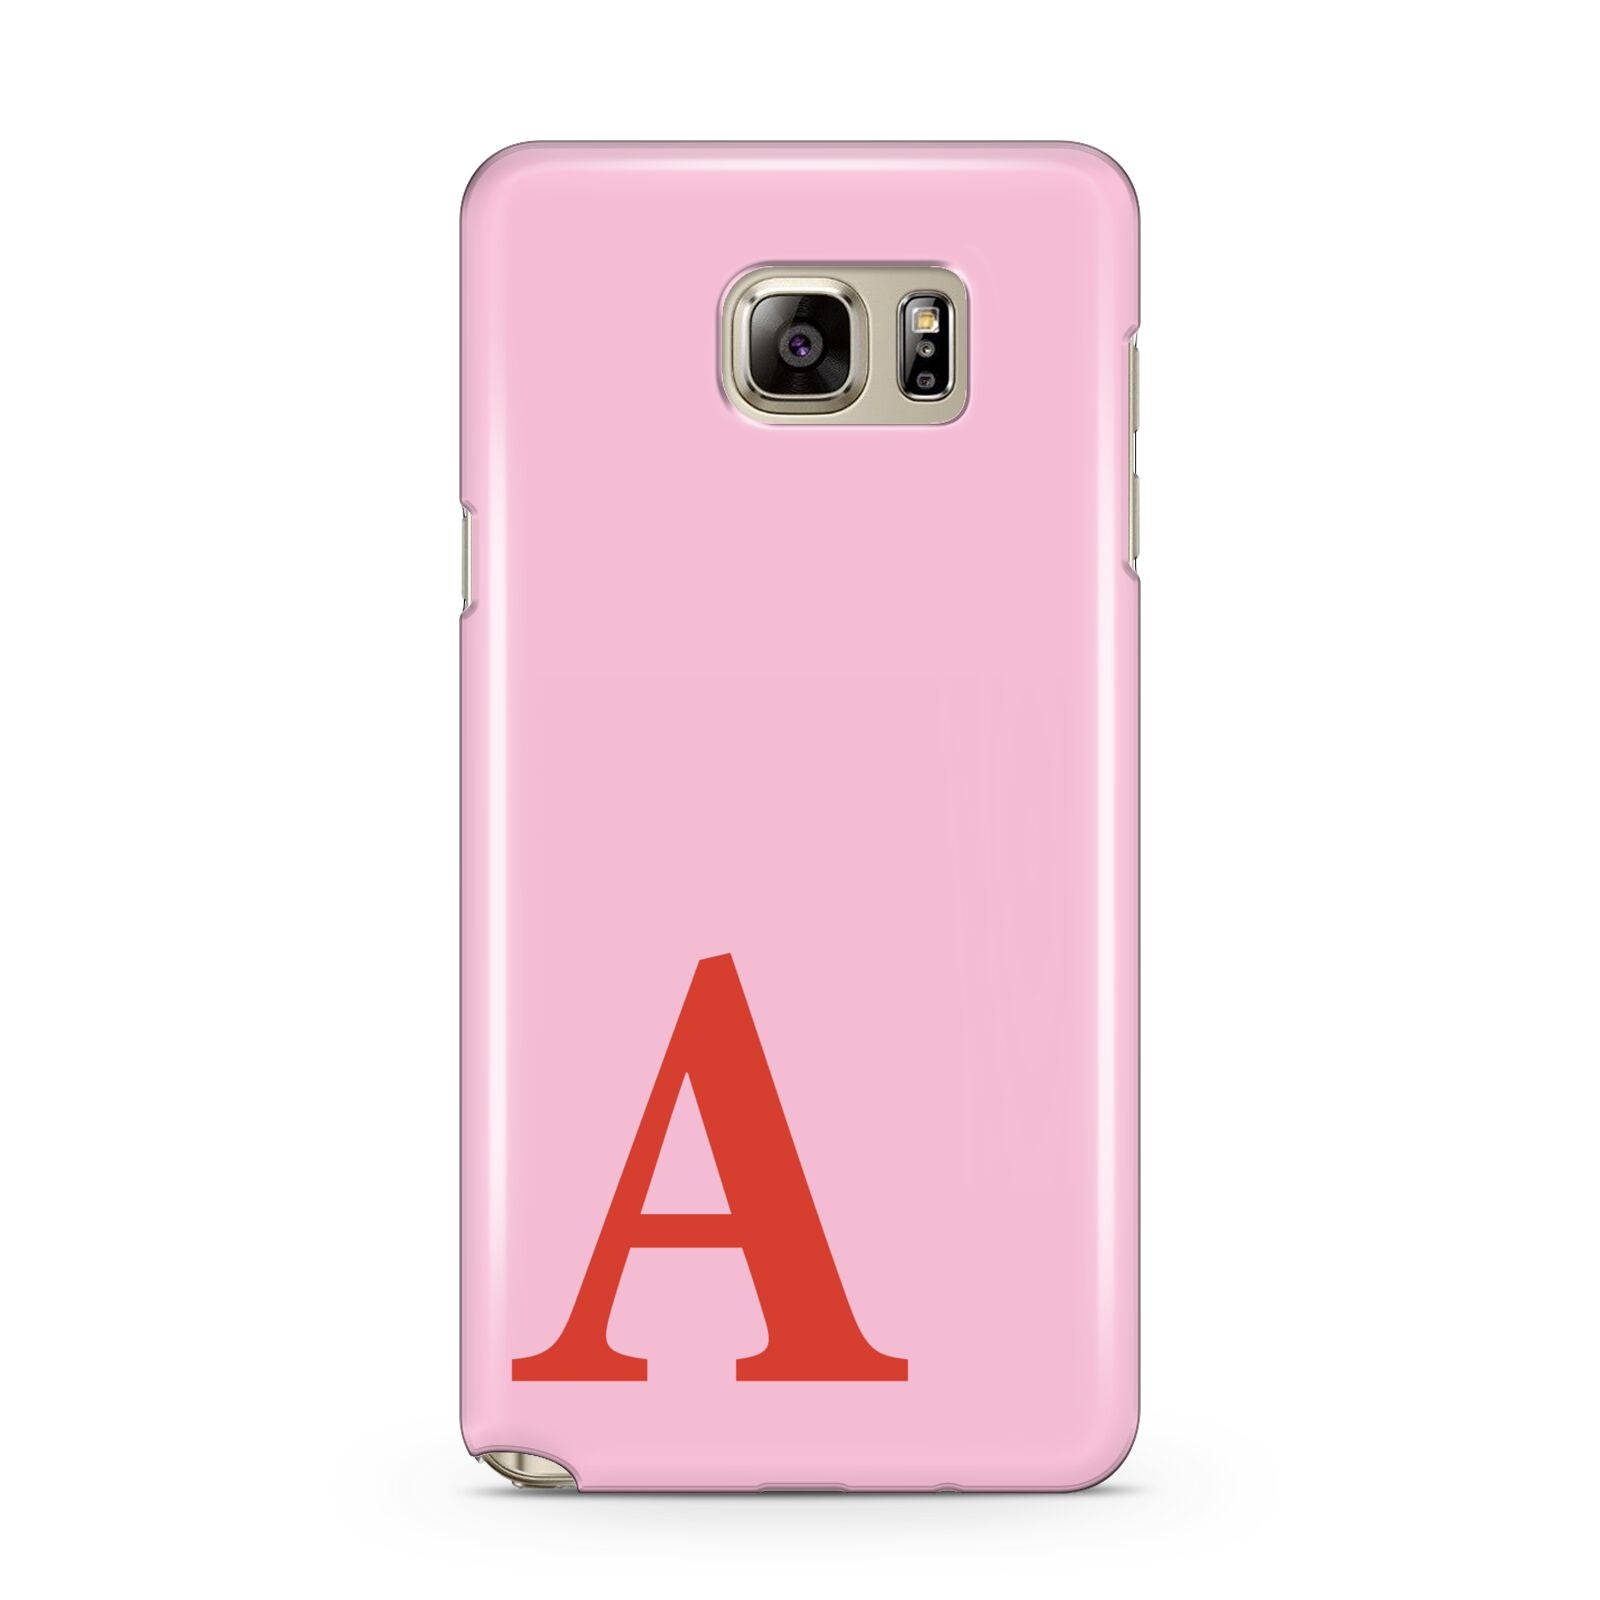 Personalised Pink and Red Samsung Galaxy Note 5 Case